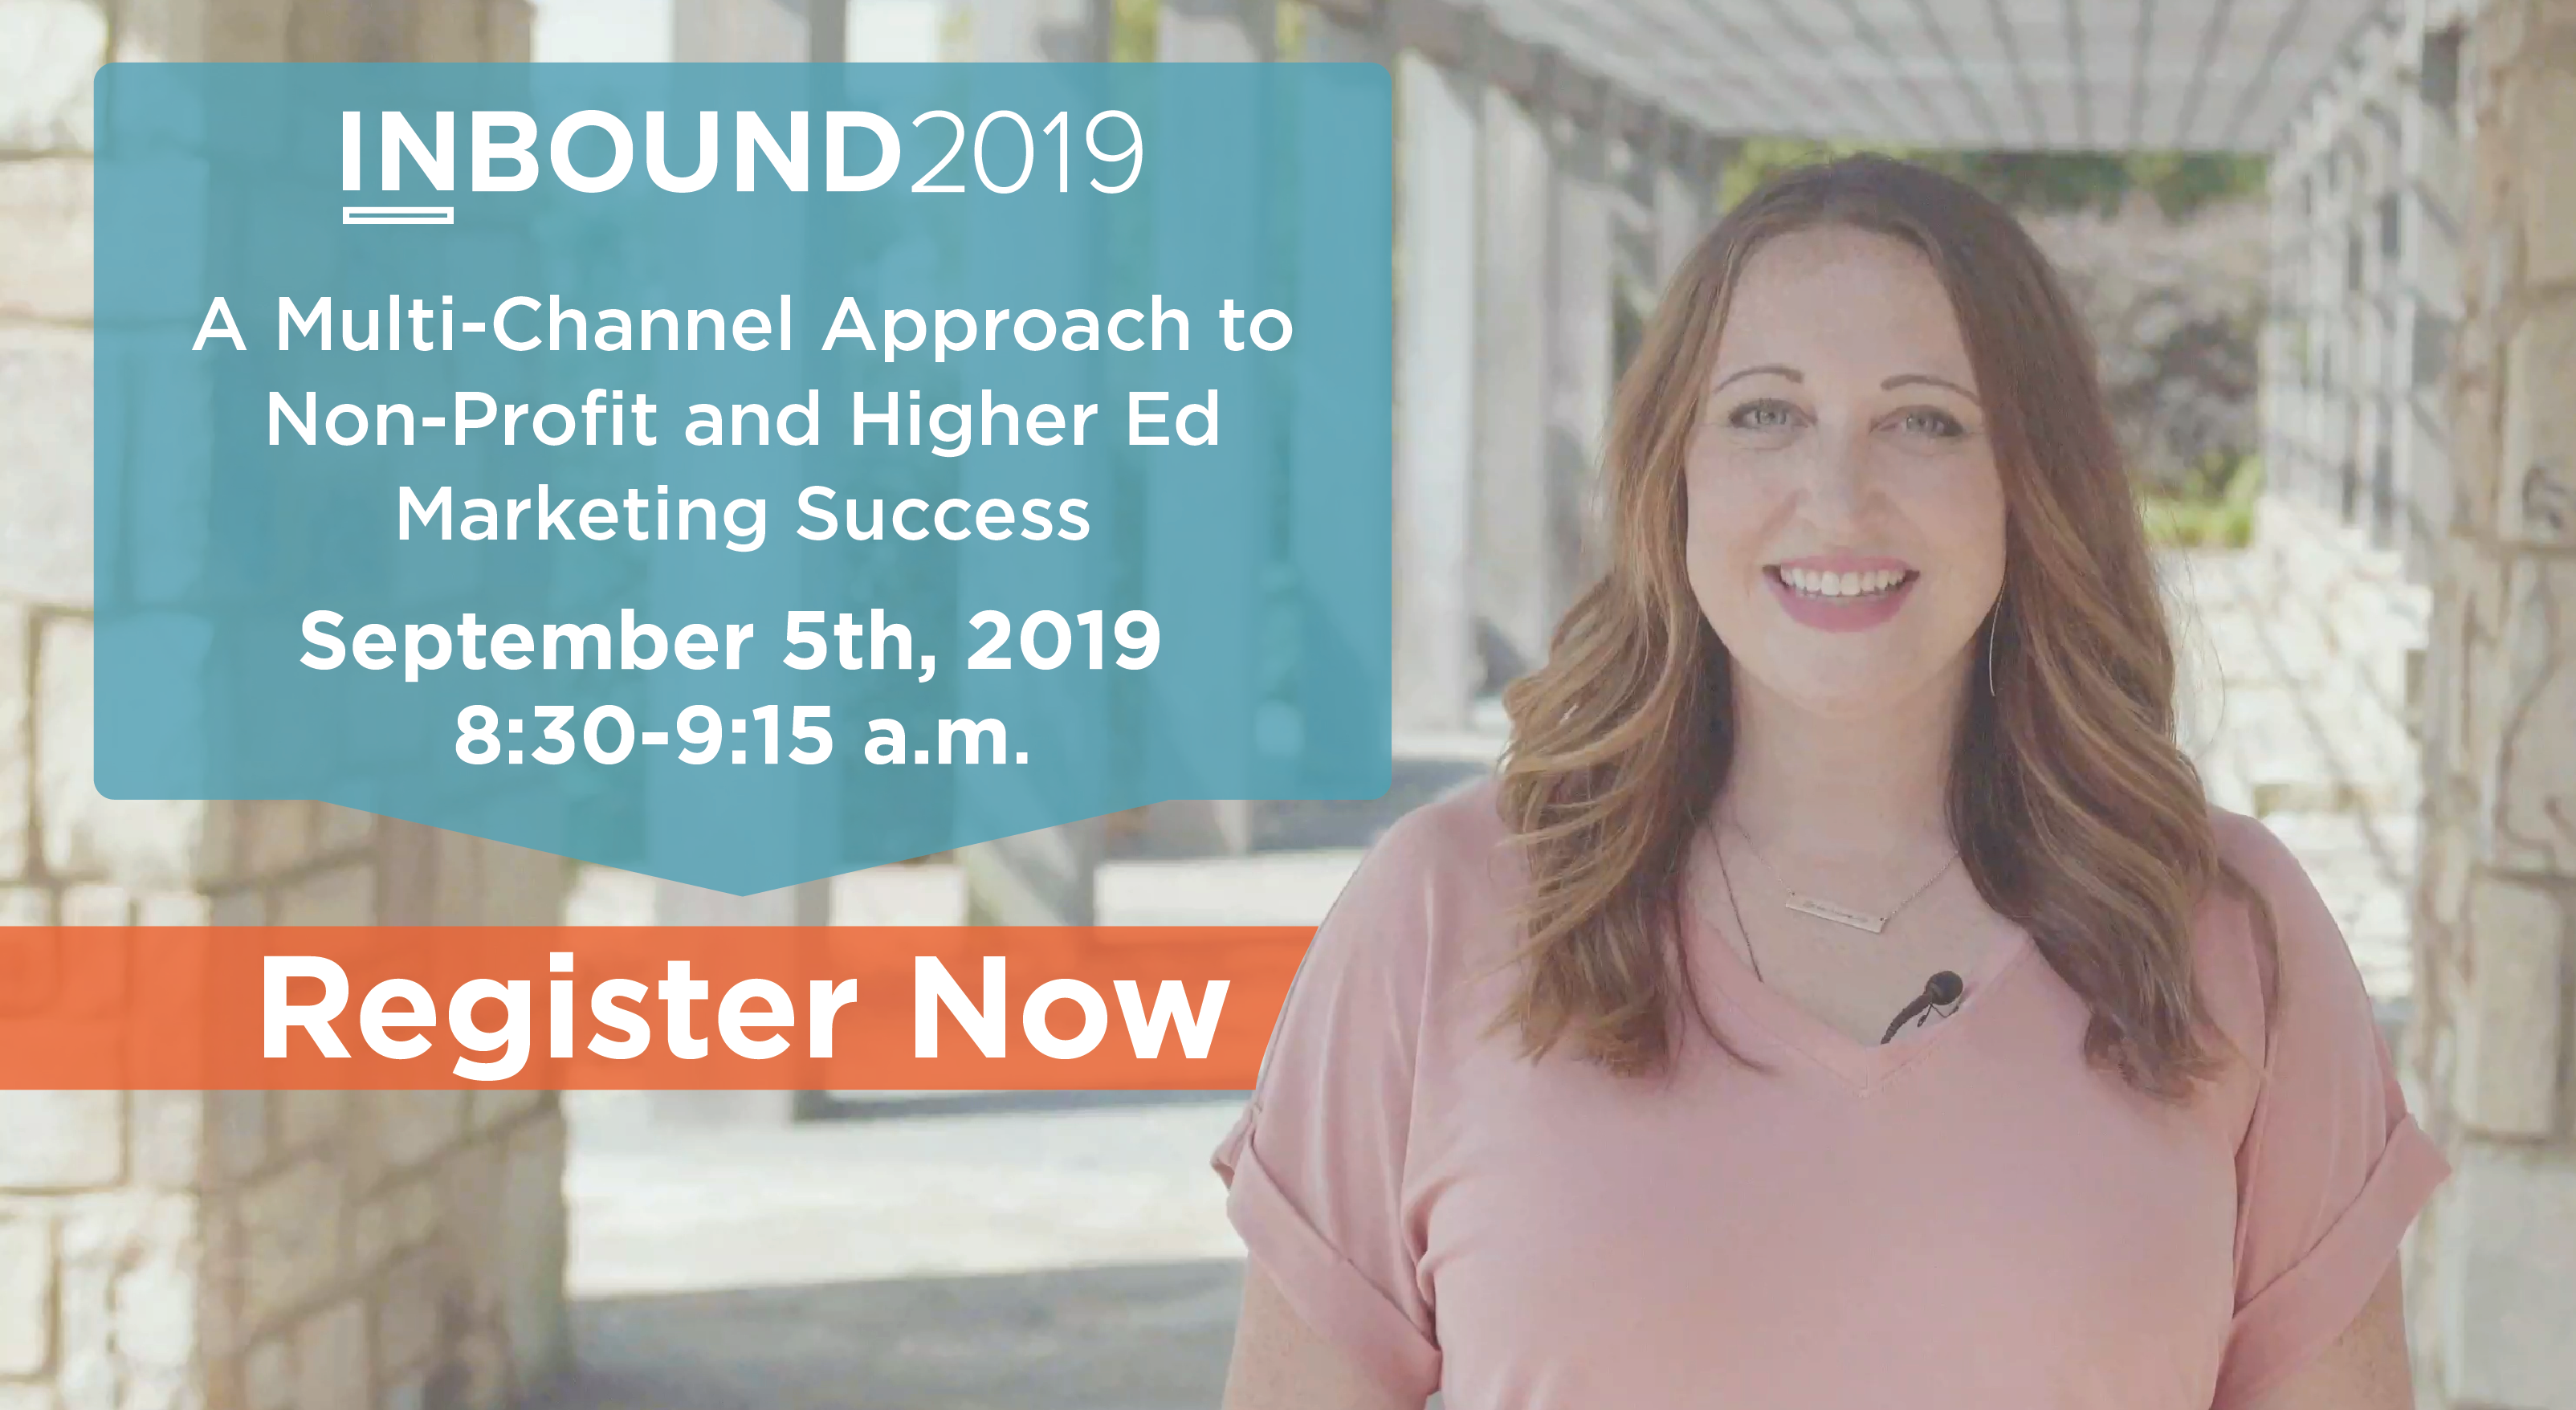 Panel Session at INBOUND19: A Multi-Channel Approach to Non-Profit and Higher Ed Marketing Success